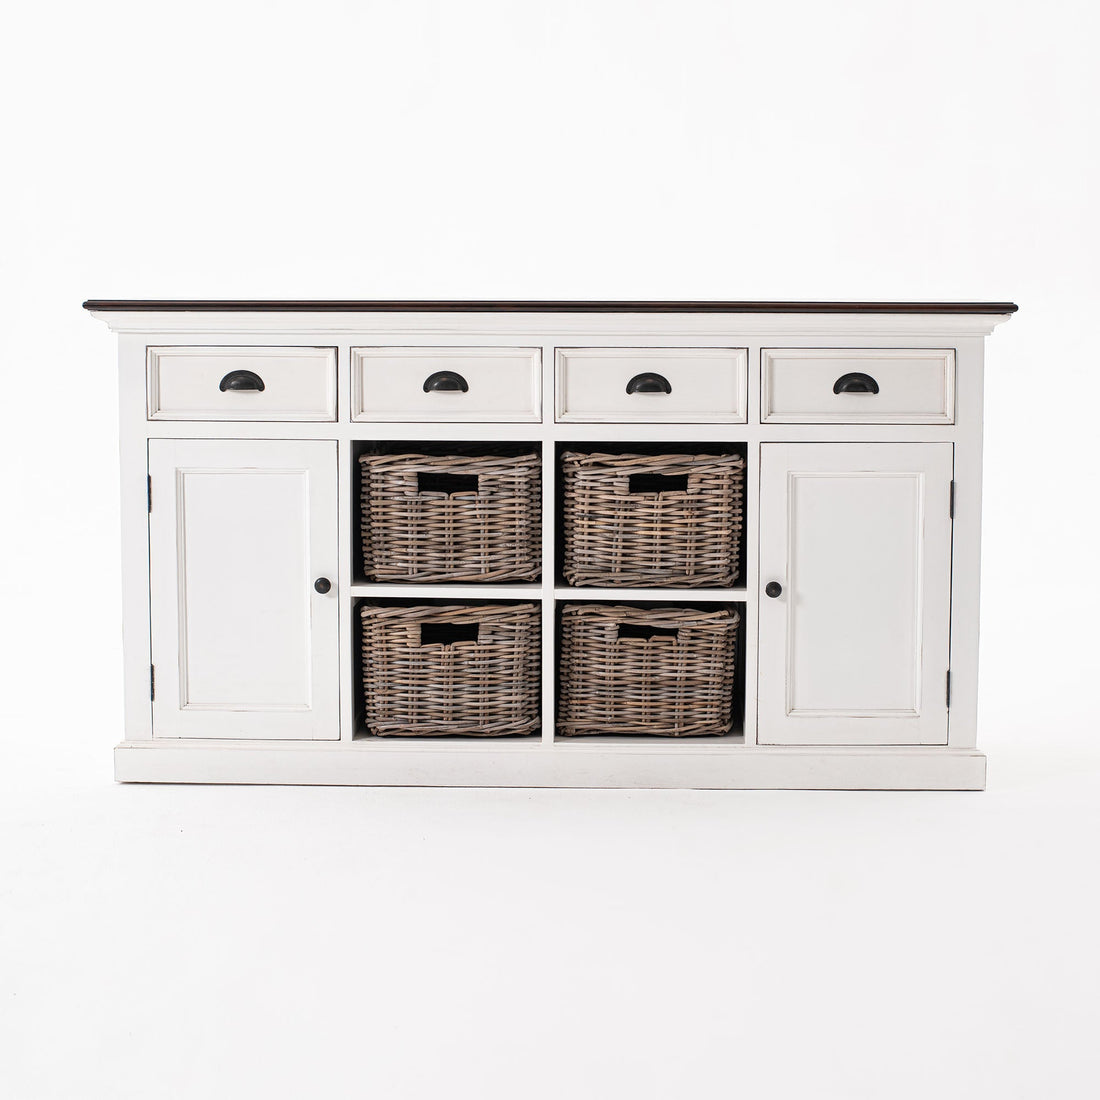 Halifax accent sideboard with 4 baskets